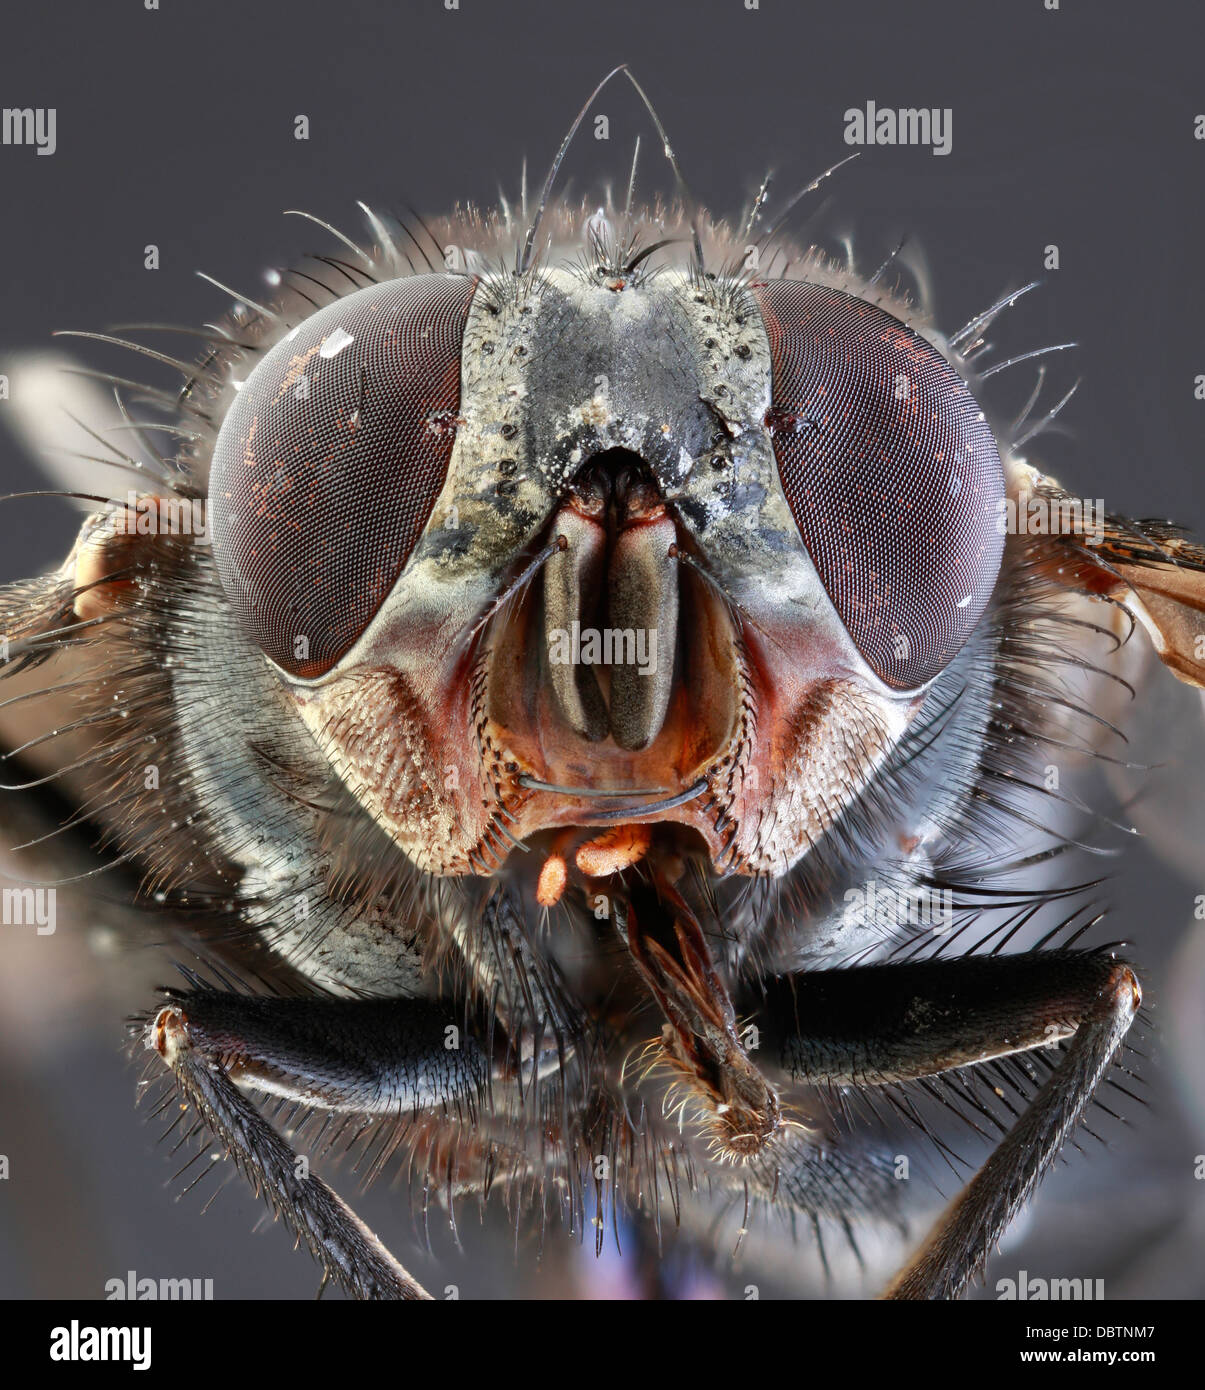 Musca Domestica Low Scale Magnification Stock Photo